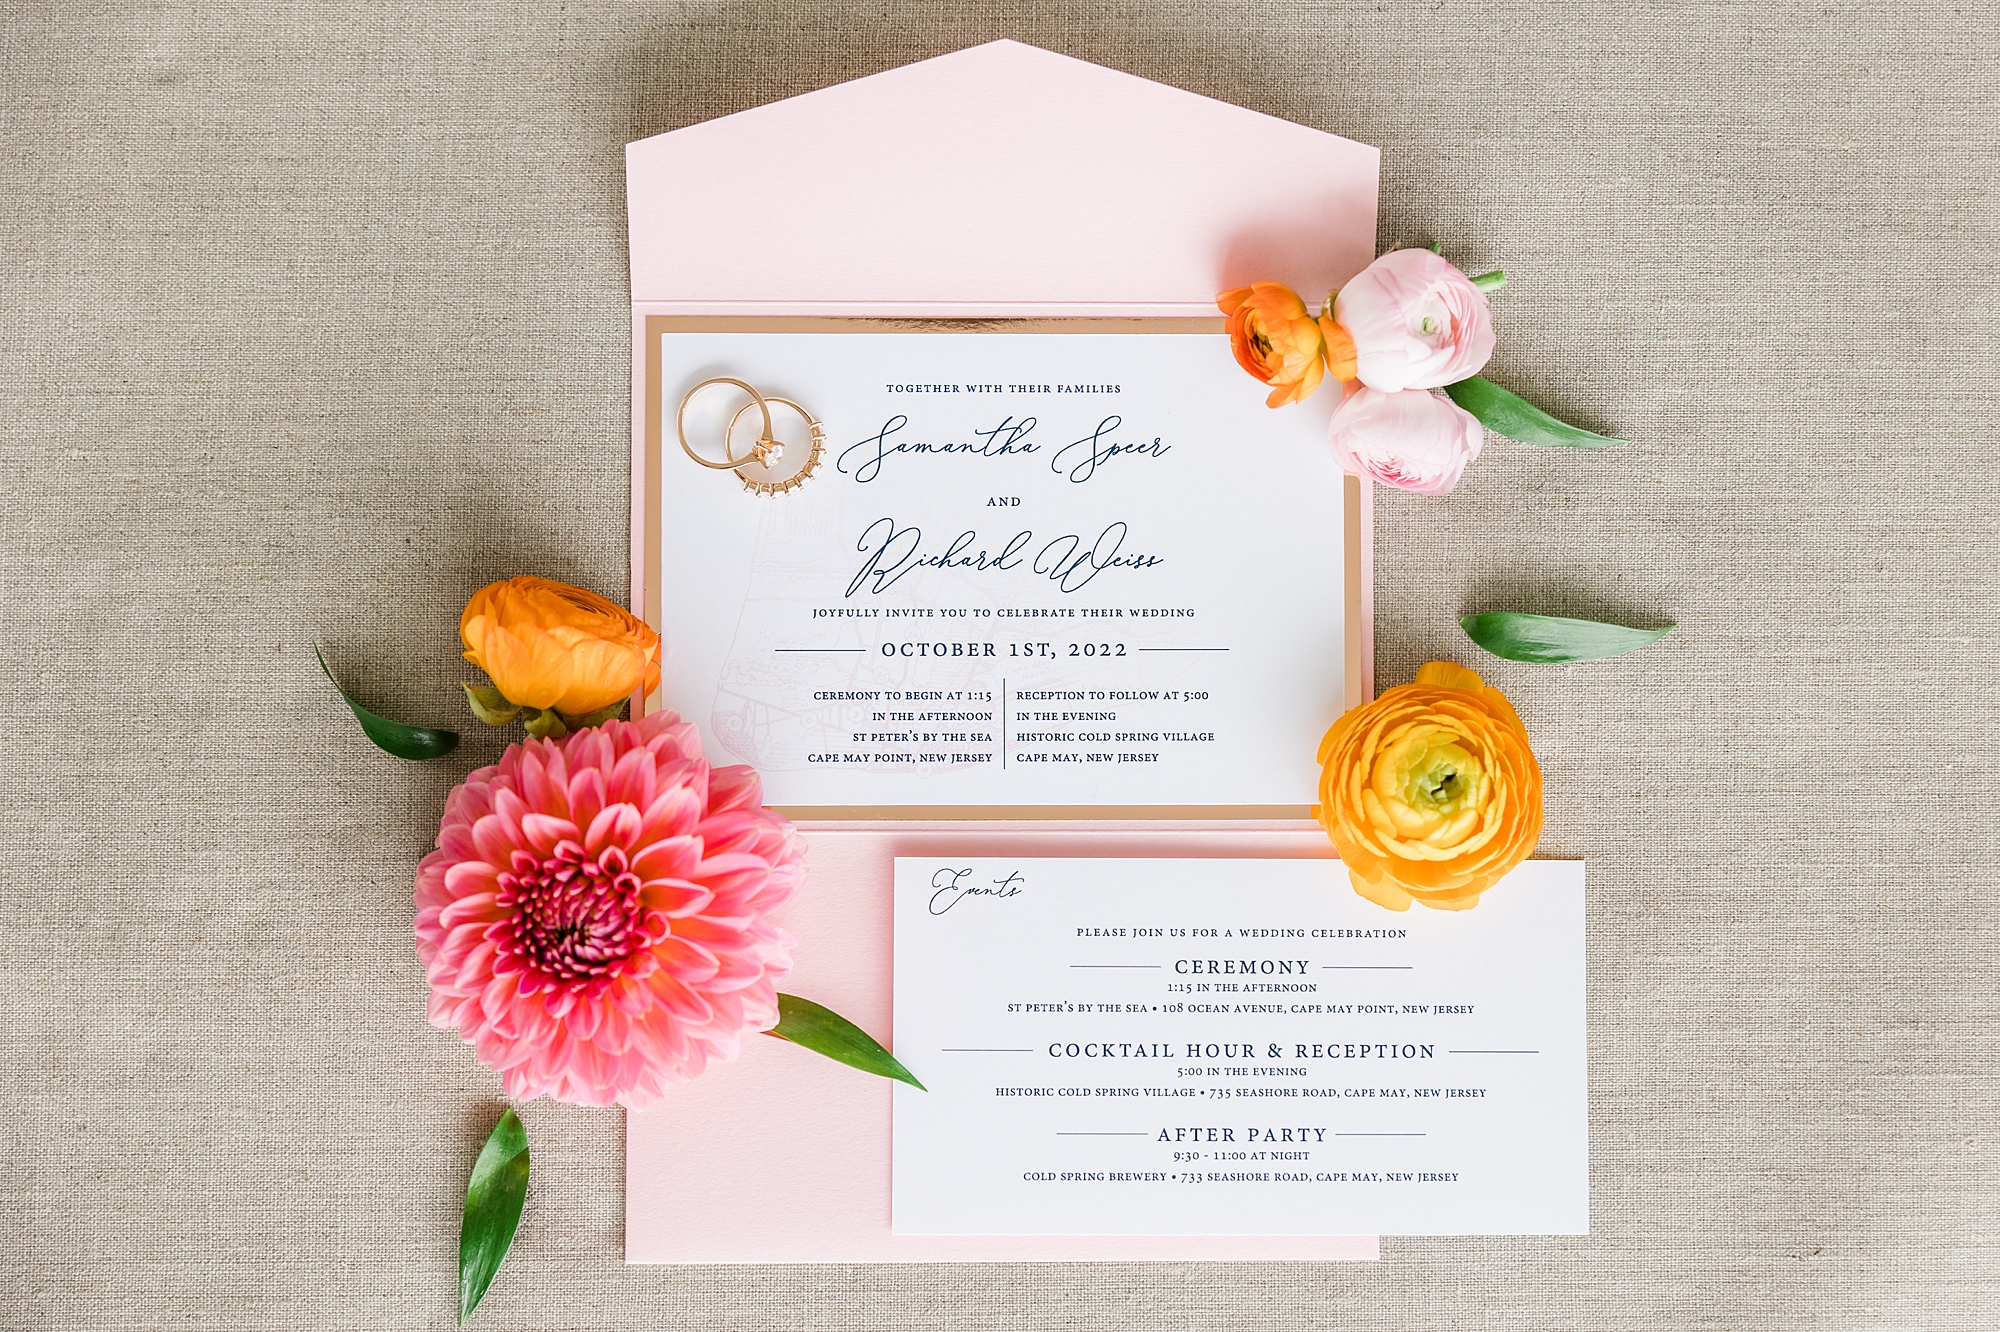 wedding invitation and details from Intimate Cape May Wedding 